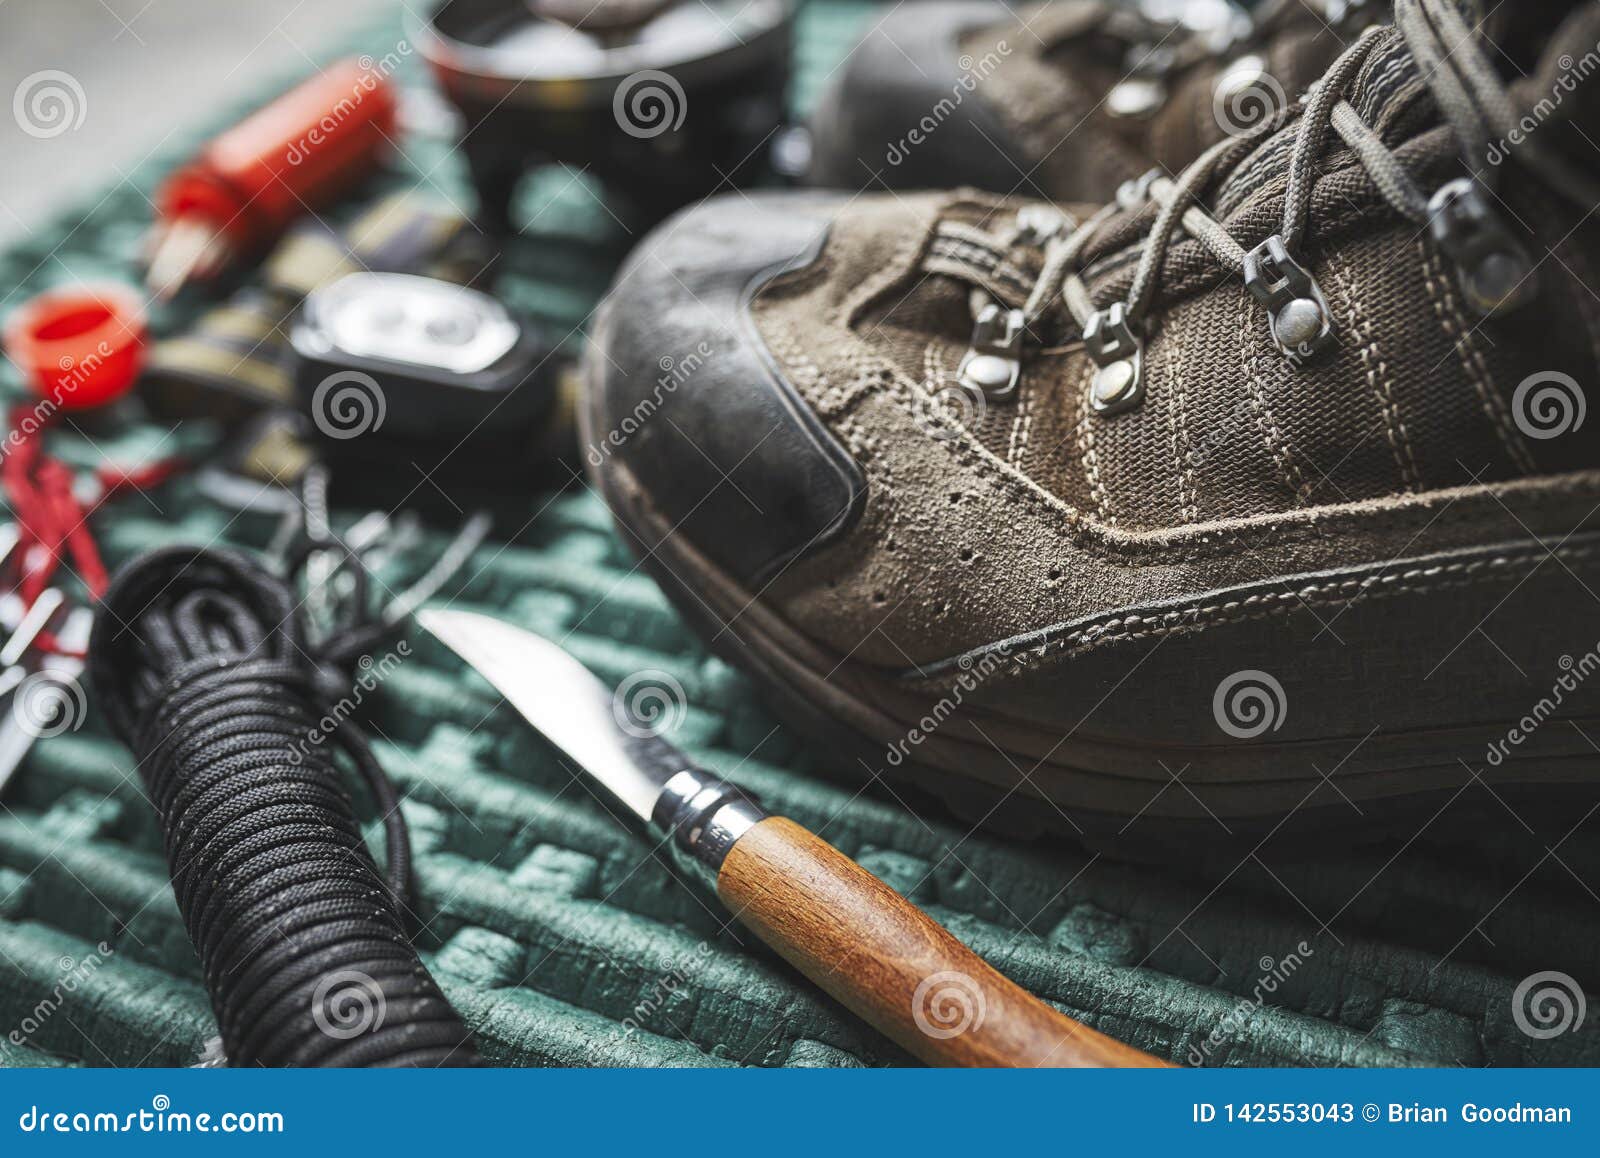 Hiking Boots and Other Gear Stock Image - Image of knife, camping ...